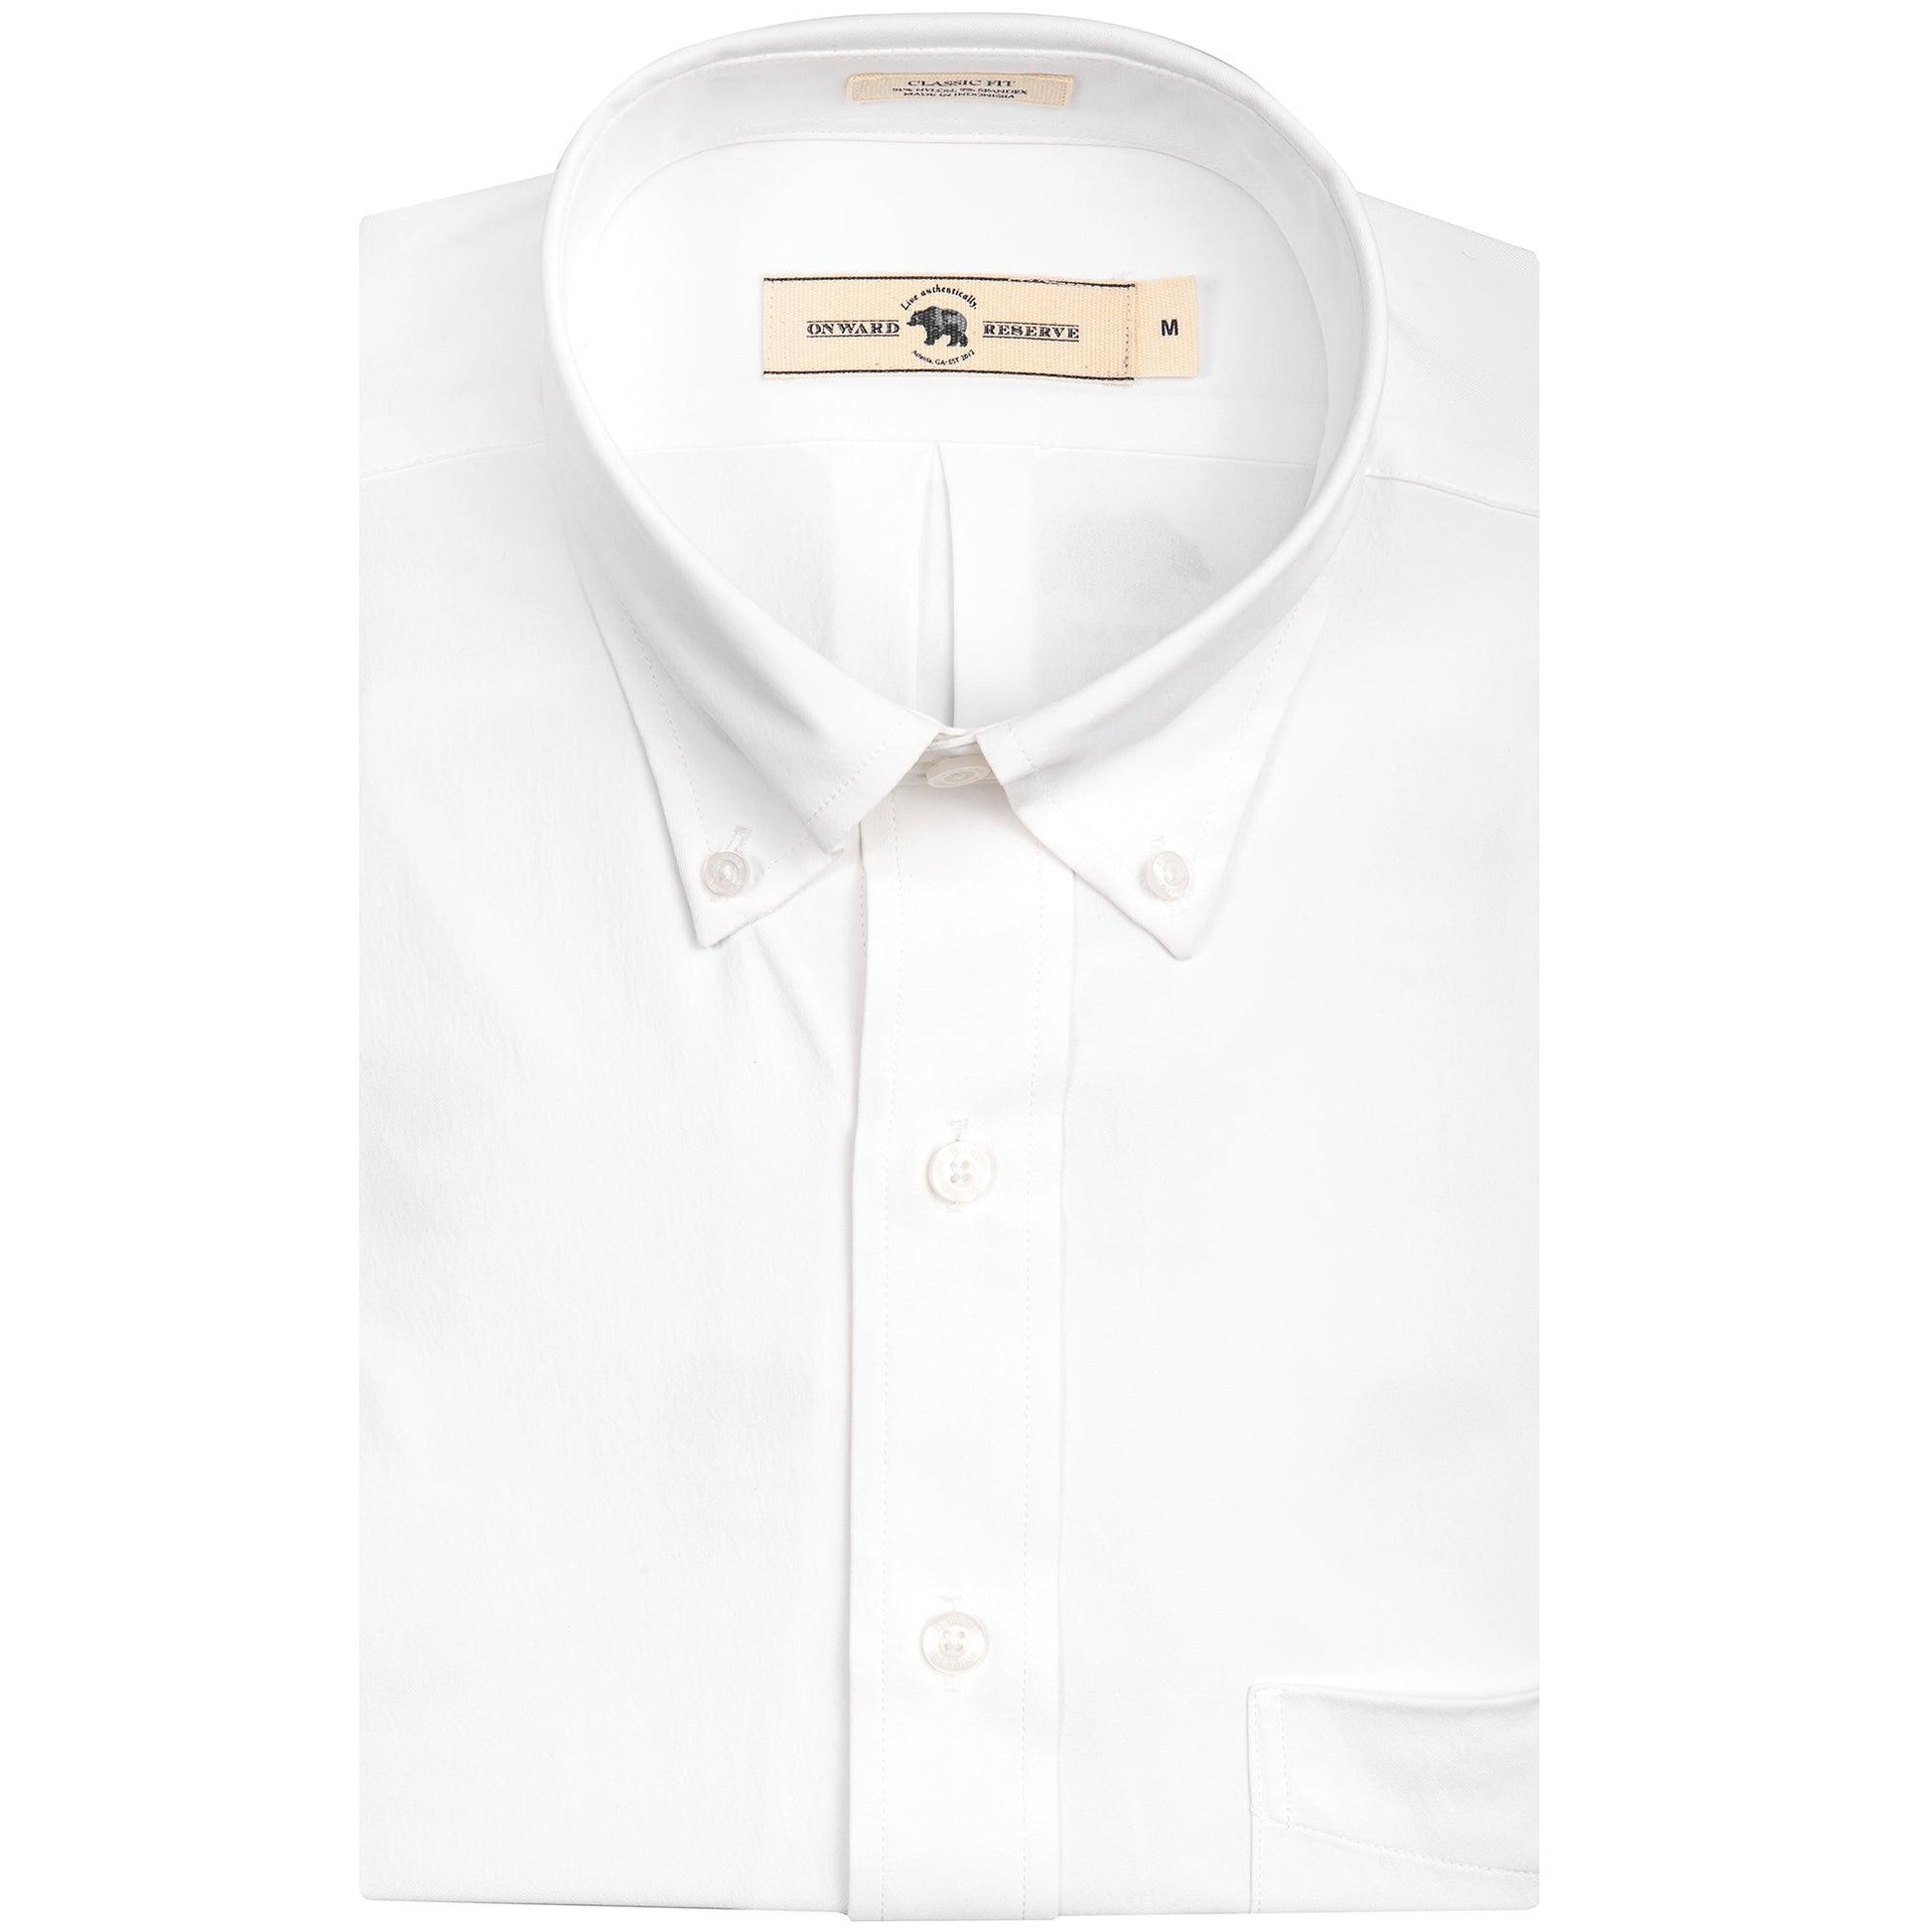 Solid White Classic Fit Performance Button Down - Onward Reserve